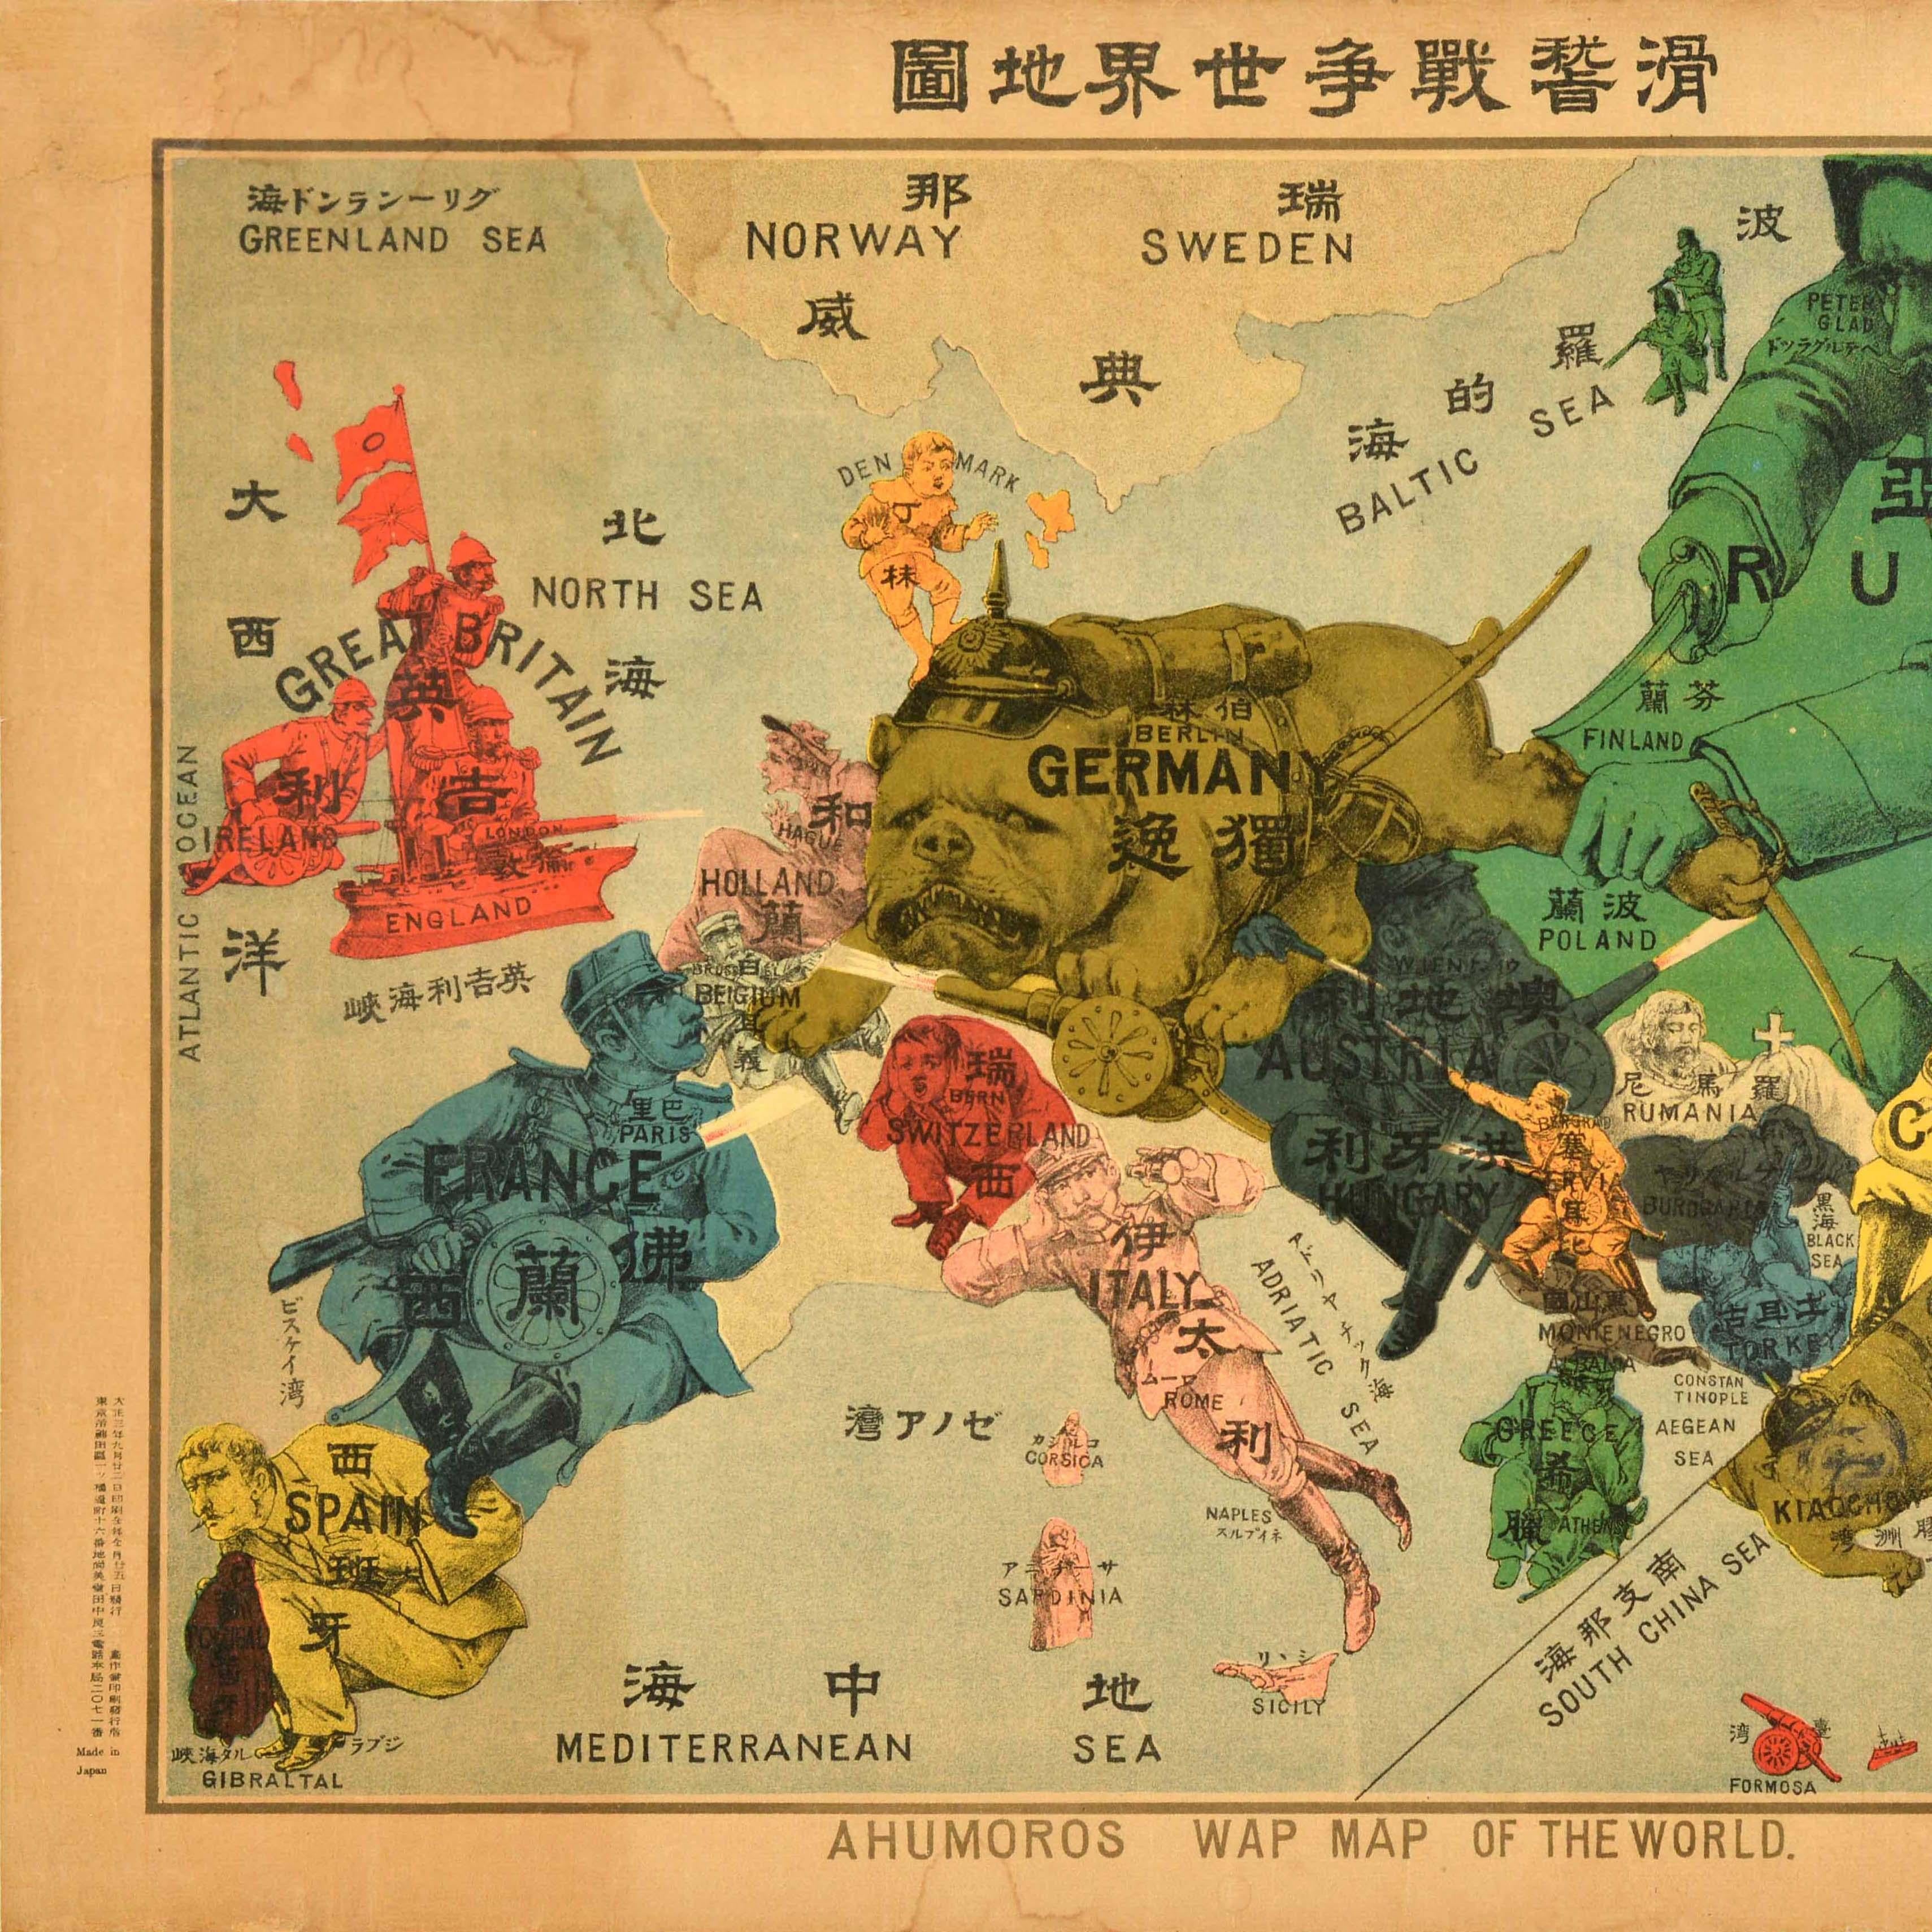 Original antique World War One satirical map of Europe and Asia portraying the outbreak of WWI featuring colourful caricatures and illustrations of the countries including Germany as a bulldog in a spiked helmet crushing Belgium with its paw, Great